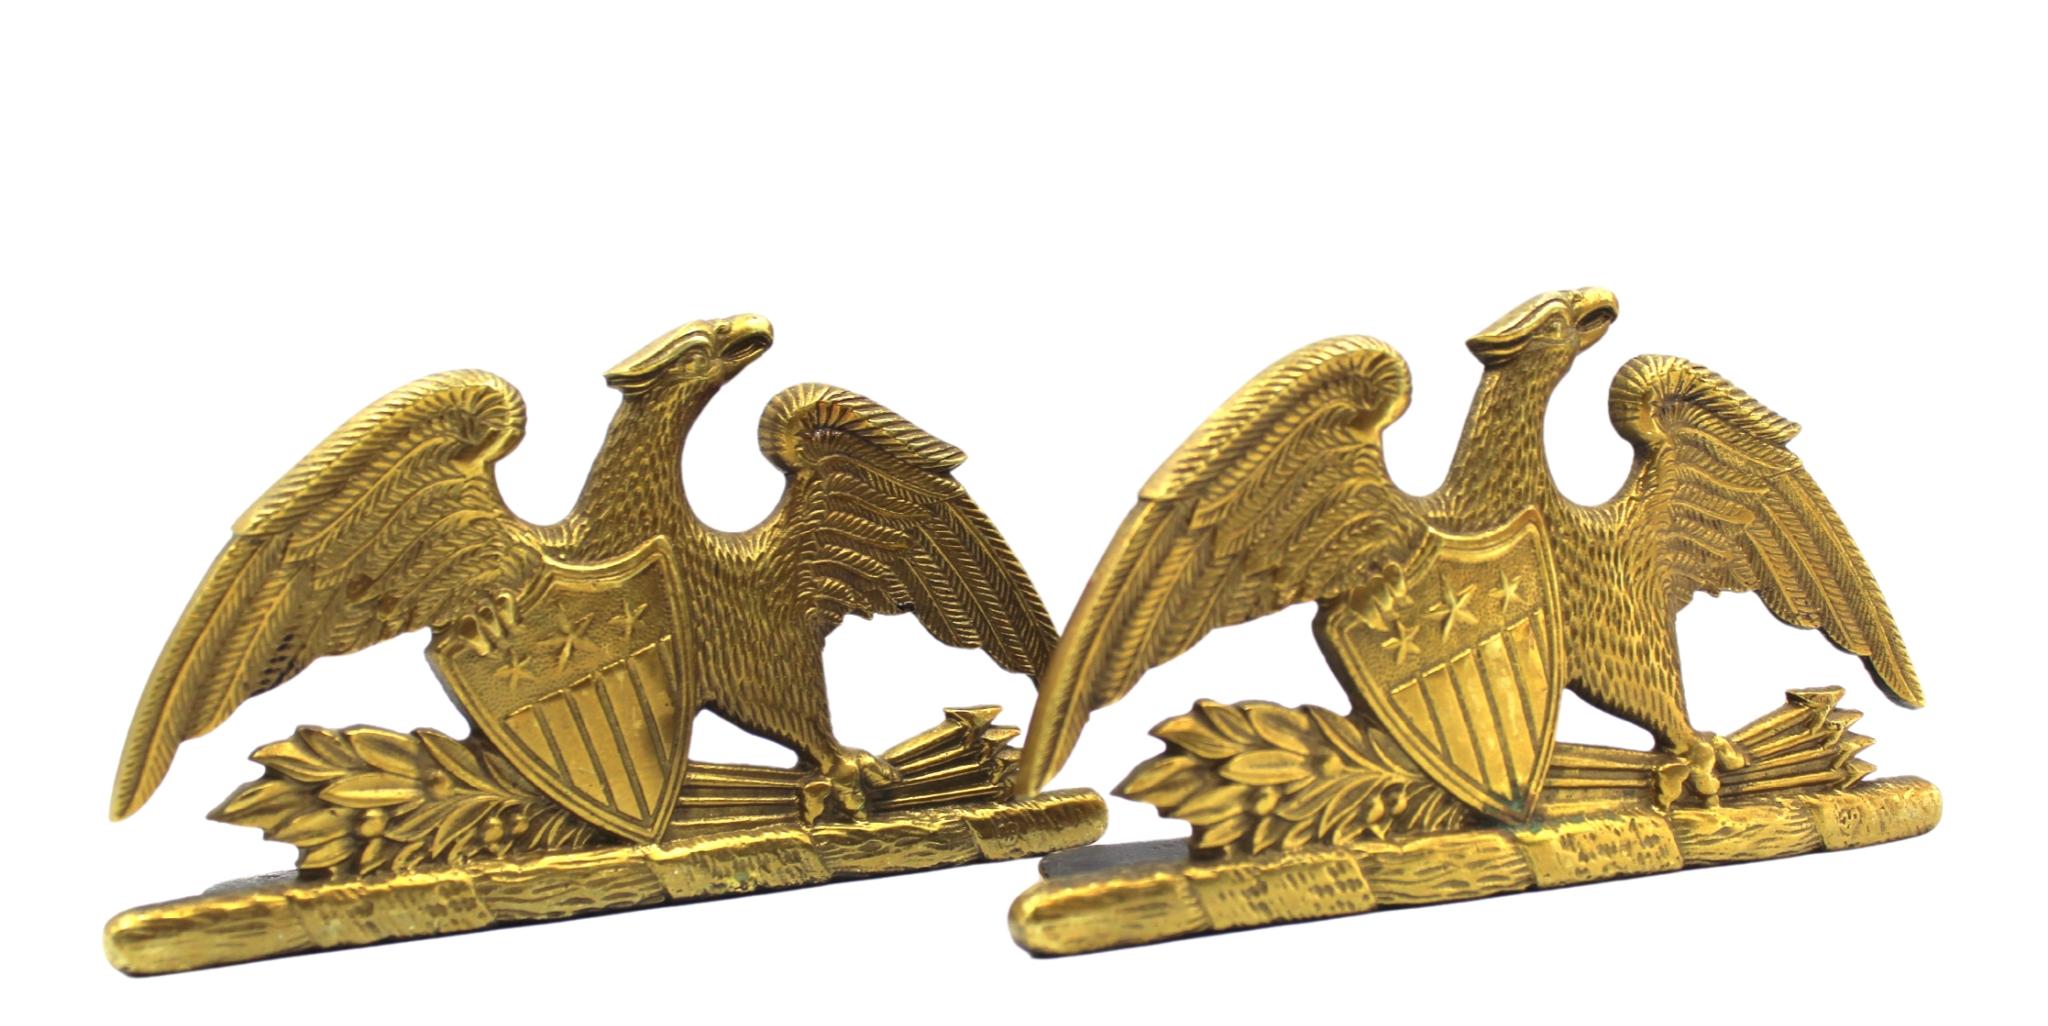 Offered is a beautiful pair of spread-wing eagle bookends by Virginia Metalcrafters, stamped 1952. The eagle is shown with its wings fully spread and a laurel branch and bundle of arrows clutched in its left talon. The eagle clutches a Union shield